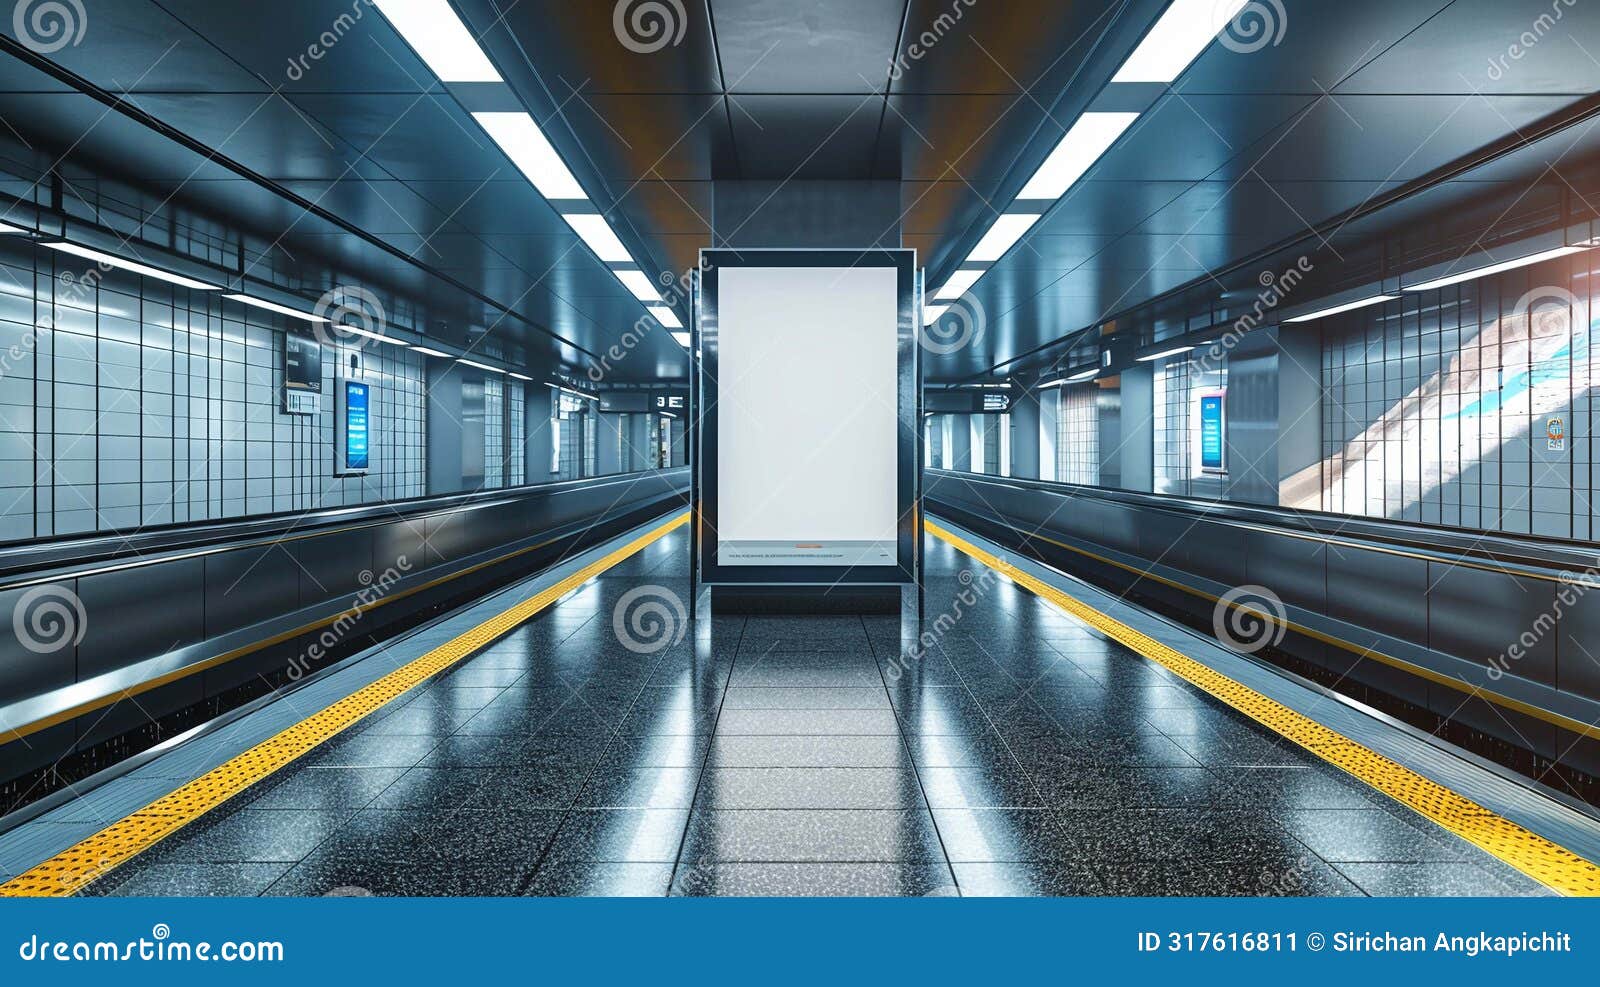 capture the attention of daily commuters with an empty poster mockup, strategically located on an escalator wall in a bustling